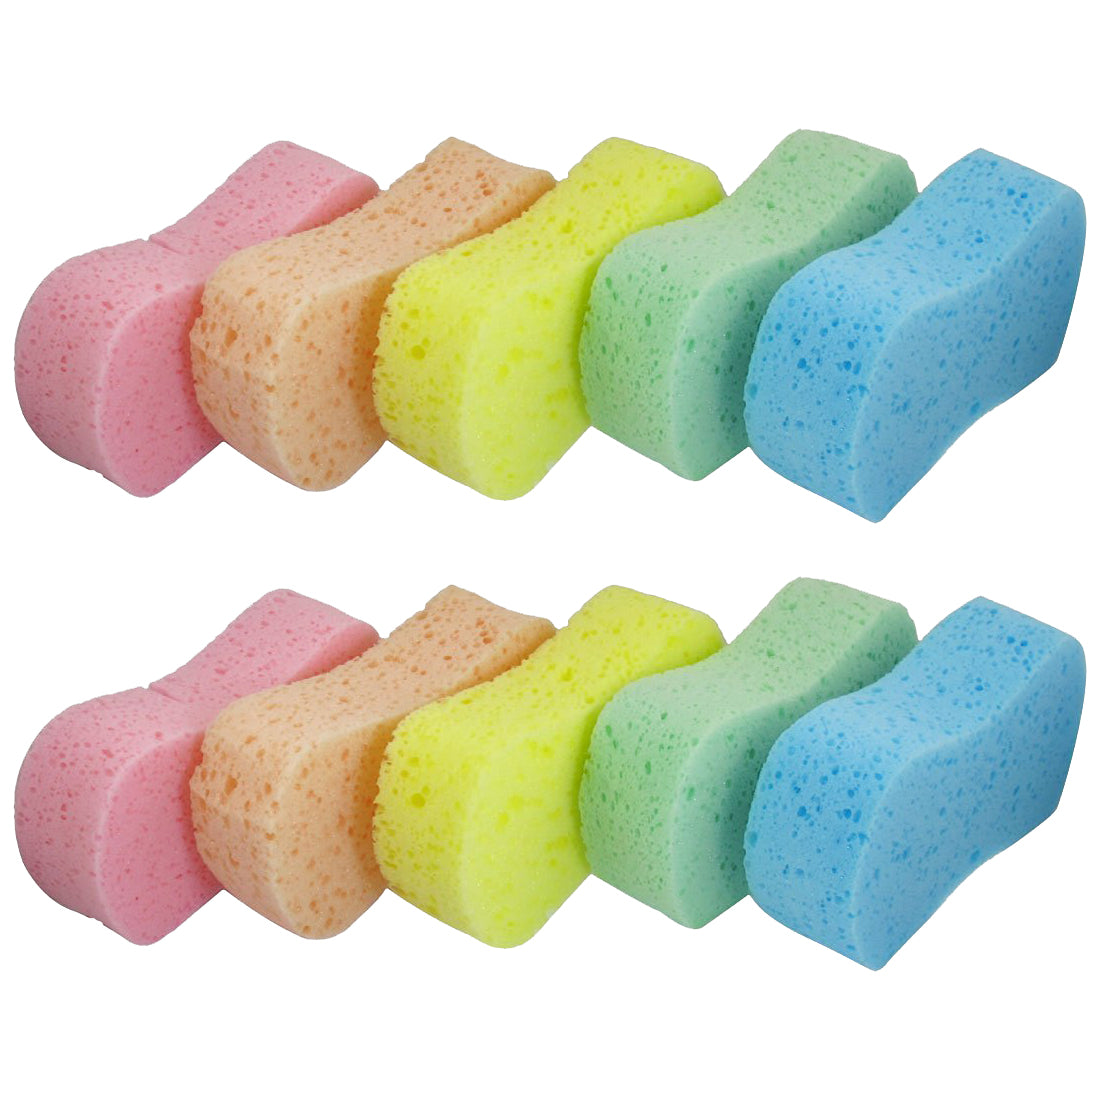 TOPZEA 15 Pcs Car Wash Sponges, Handy Cleaning Scrubber Washing Sponge Pads  for Cars and Kitchen with Vacuum Compressed Packing, 5 Colors